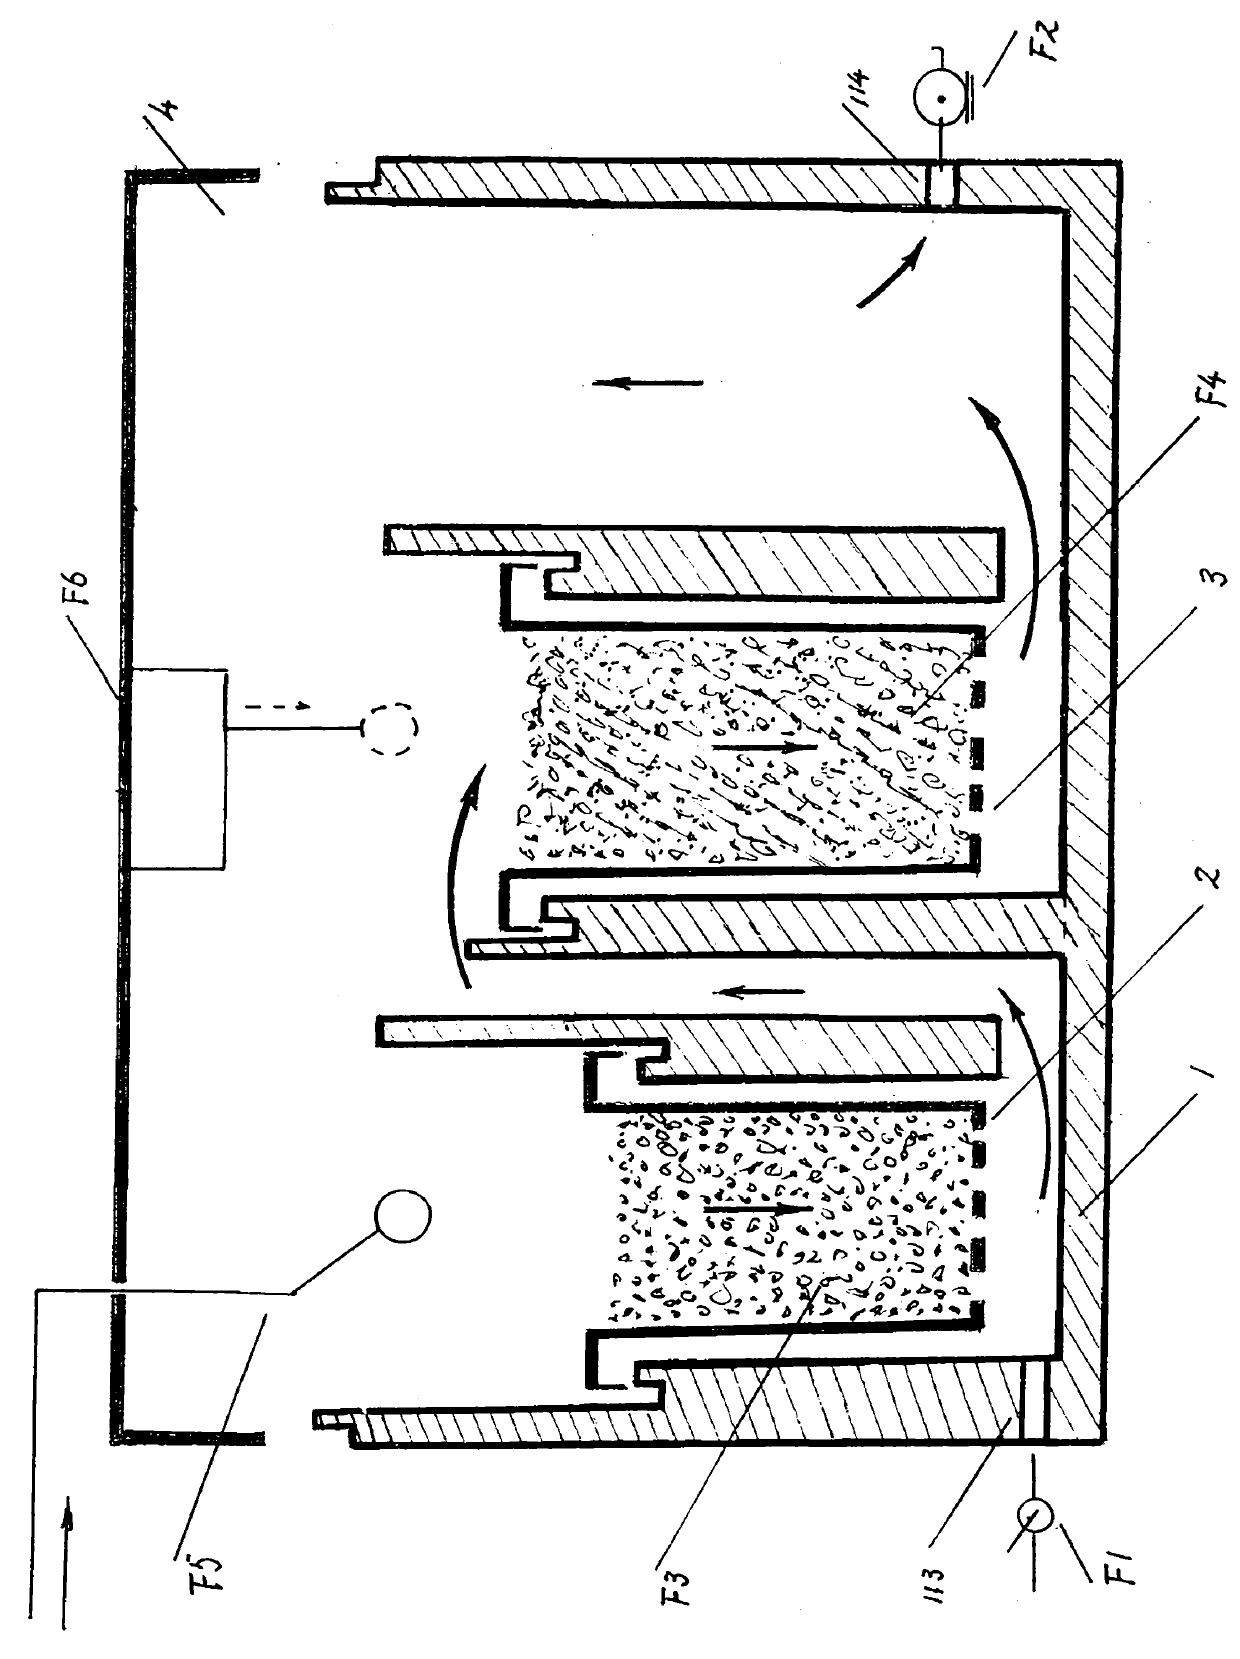 Building block type modules of horizontal structure capable of continuous downstream filtration